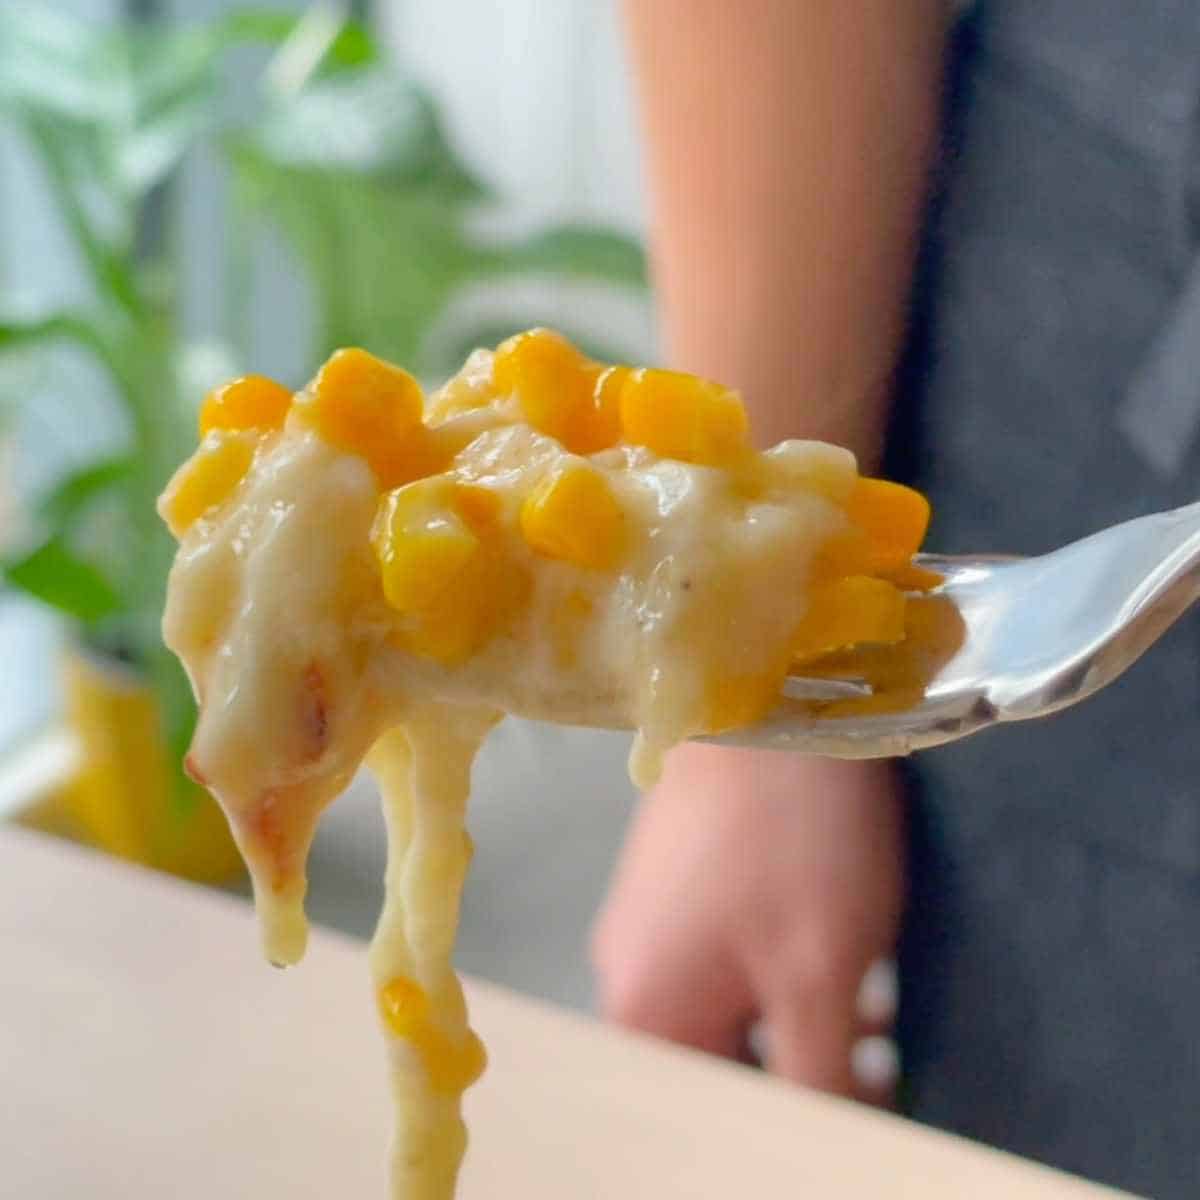 What is korean corn cheese made of